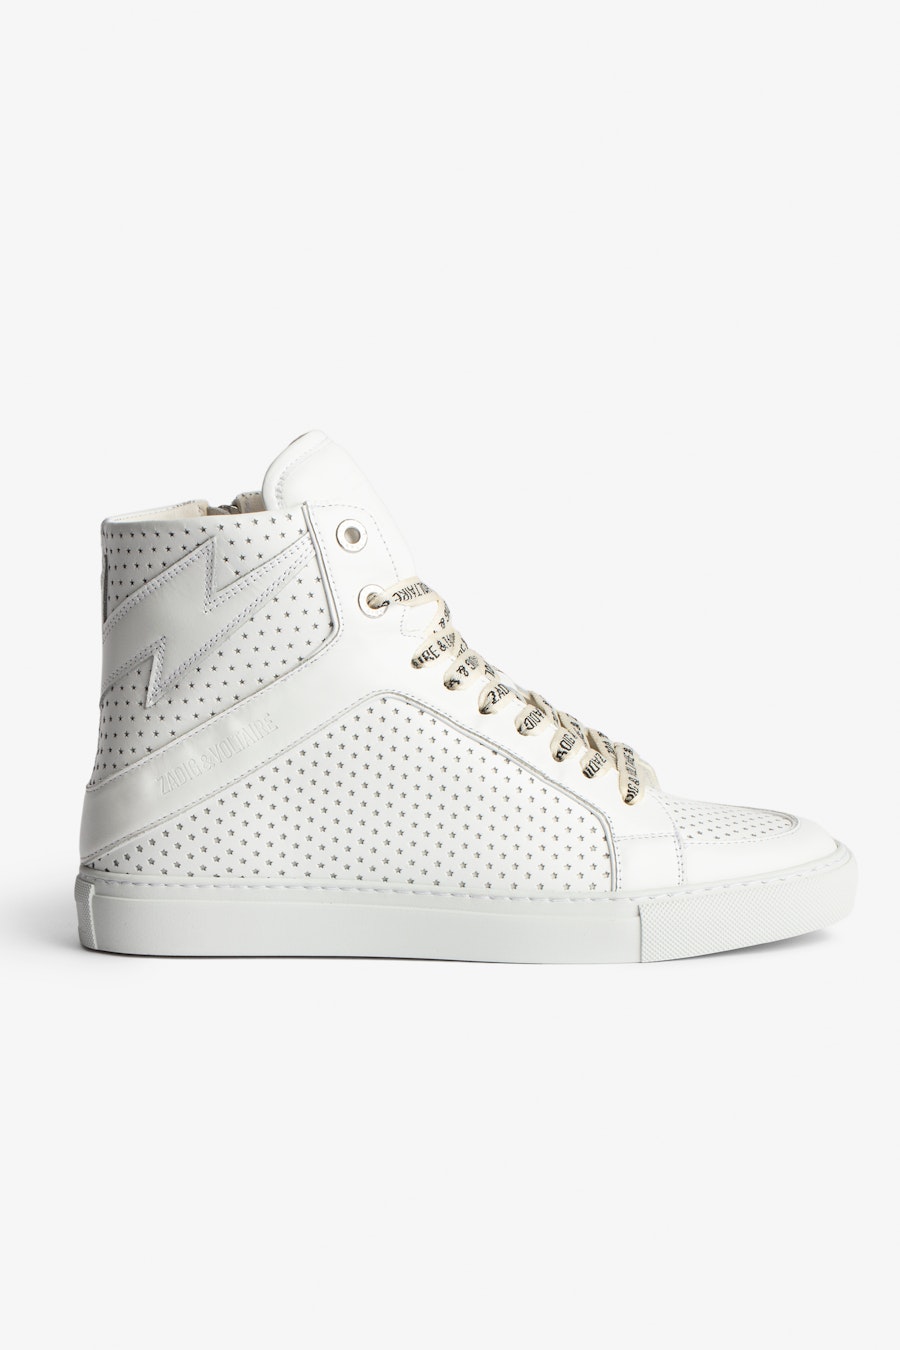 ZADIG&VOLTAIRE ZV1747 High Flash Smooth Sneakers